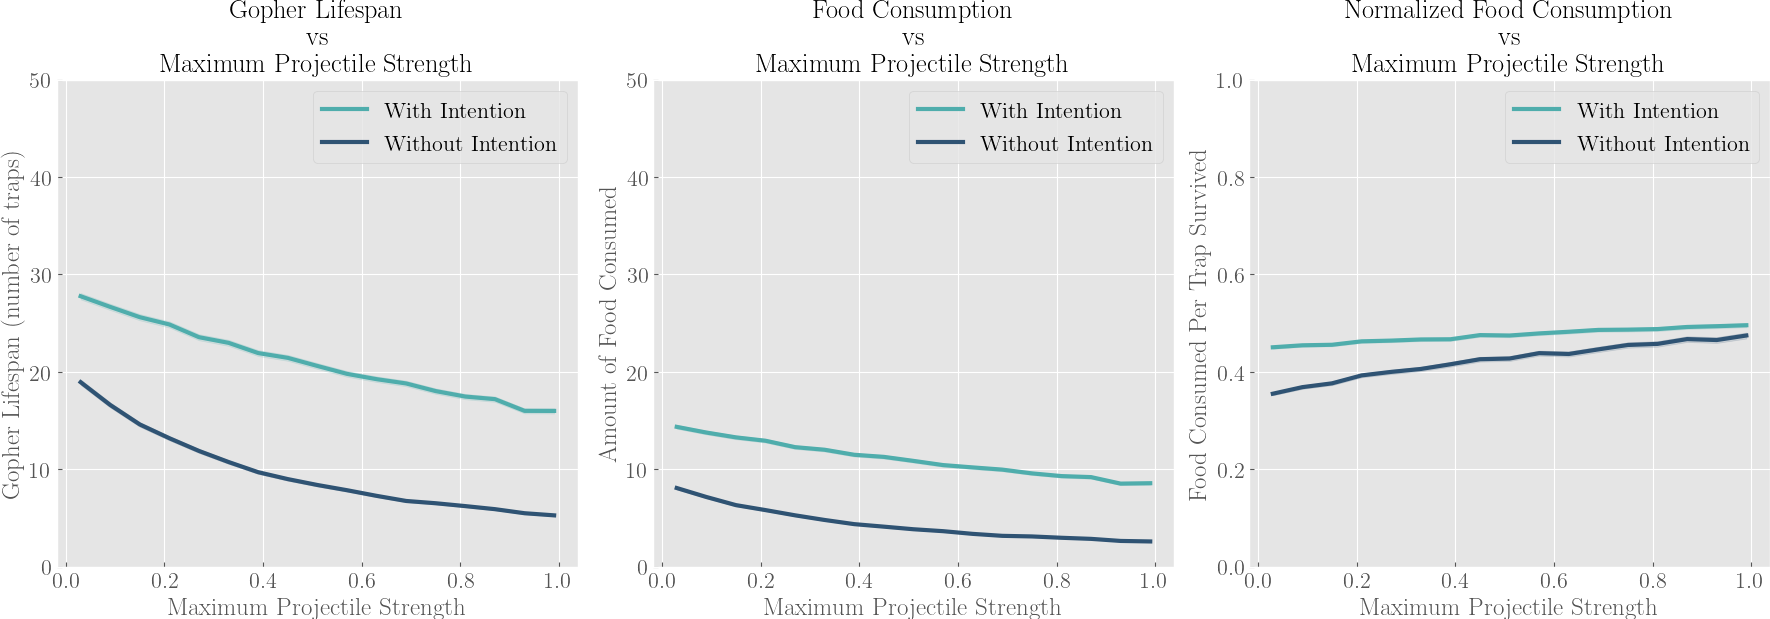 Max Projectile Strength Graph